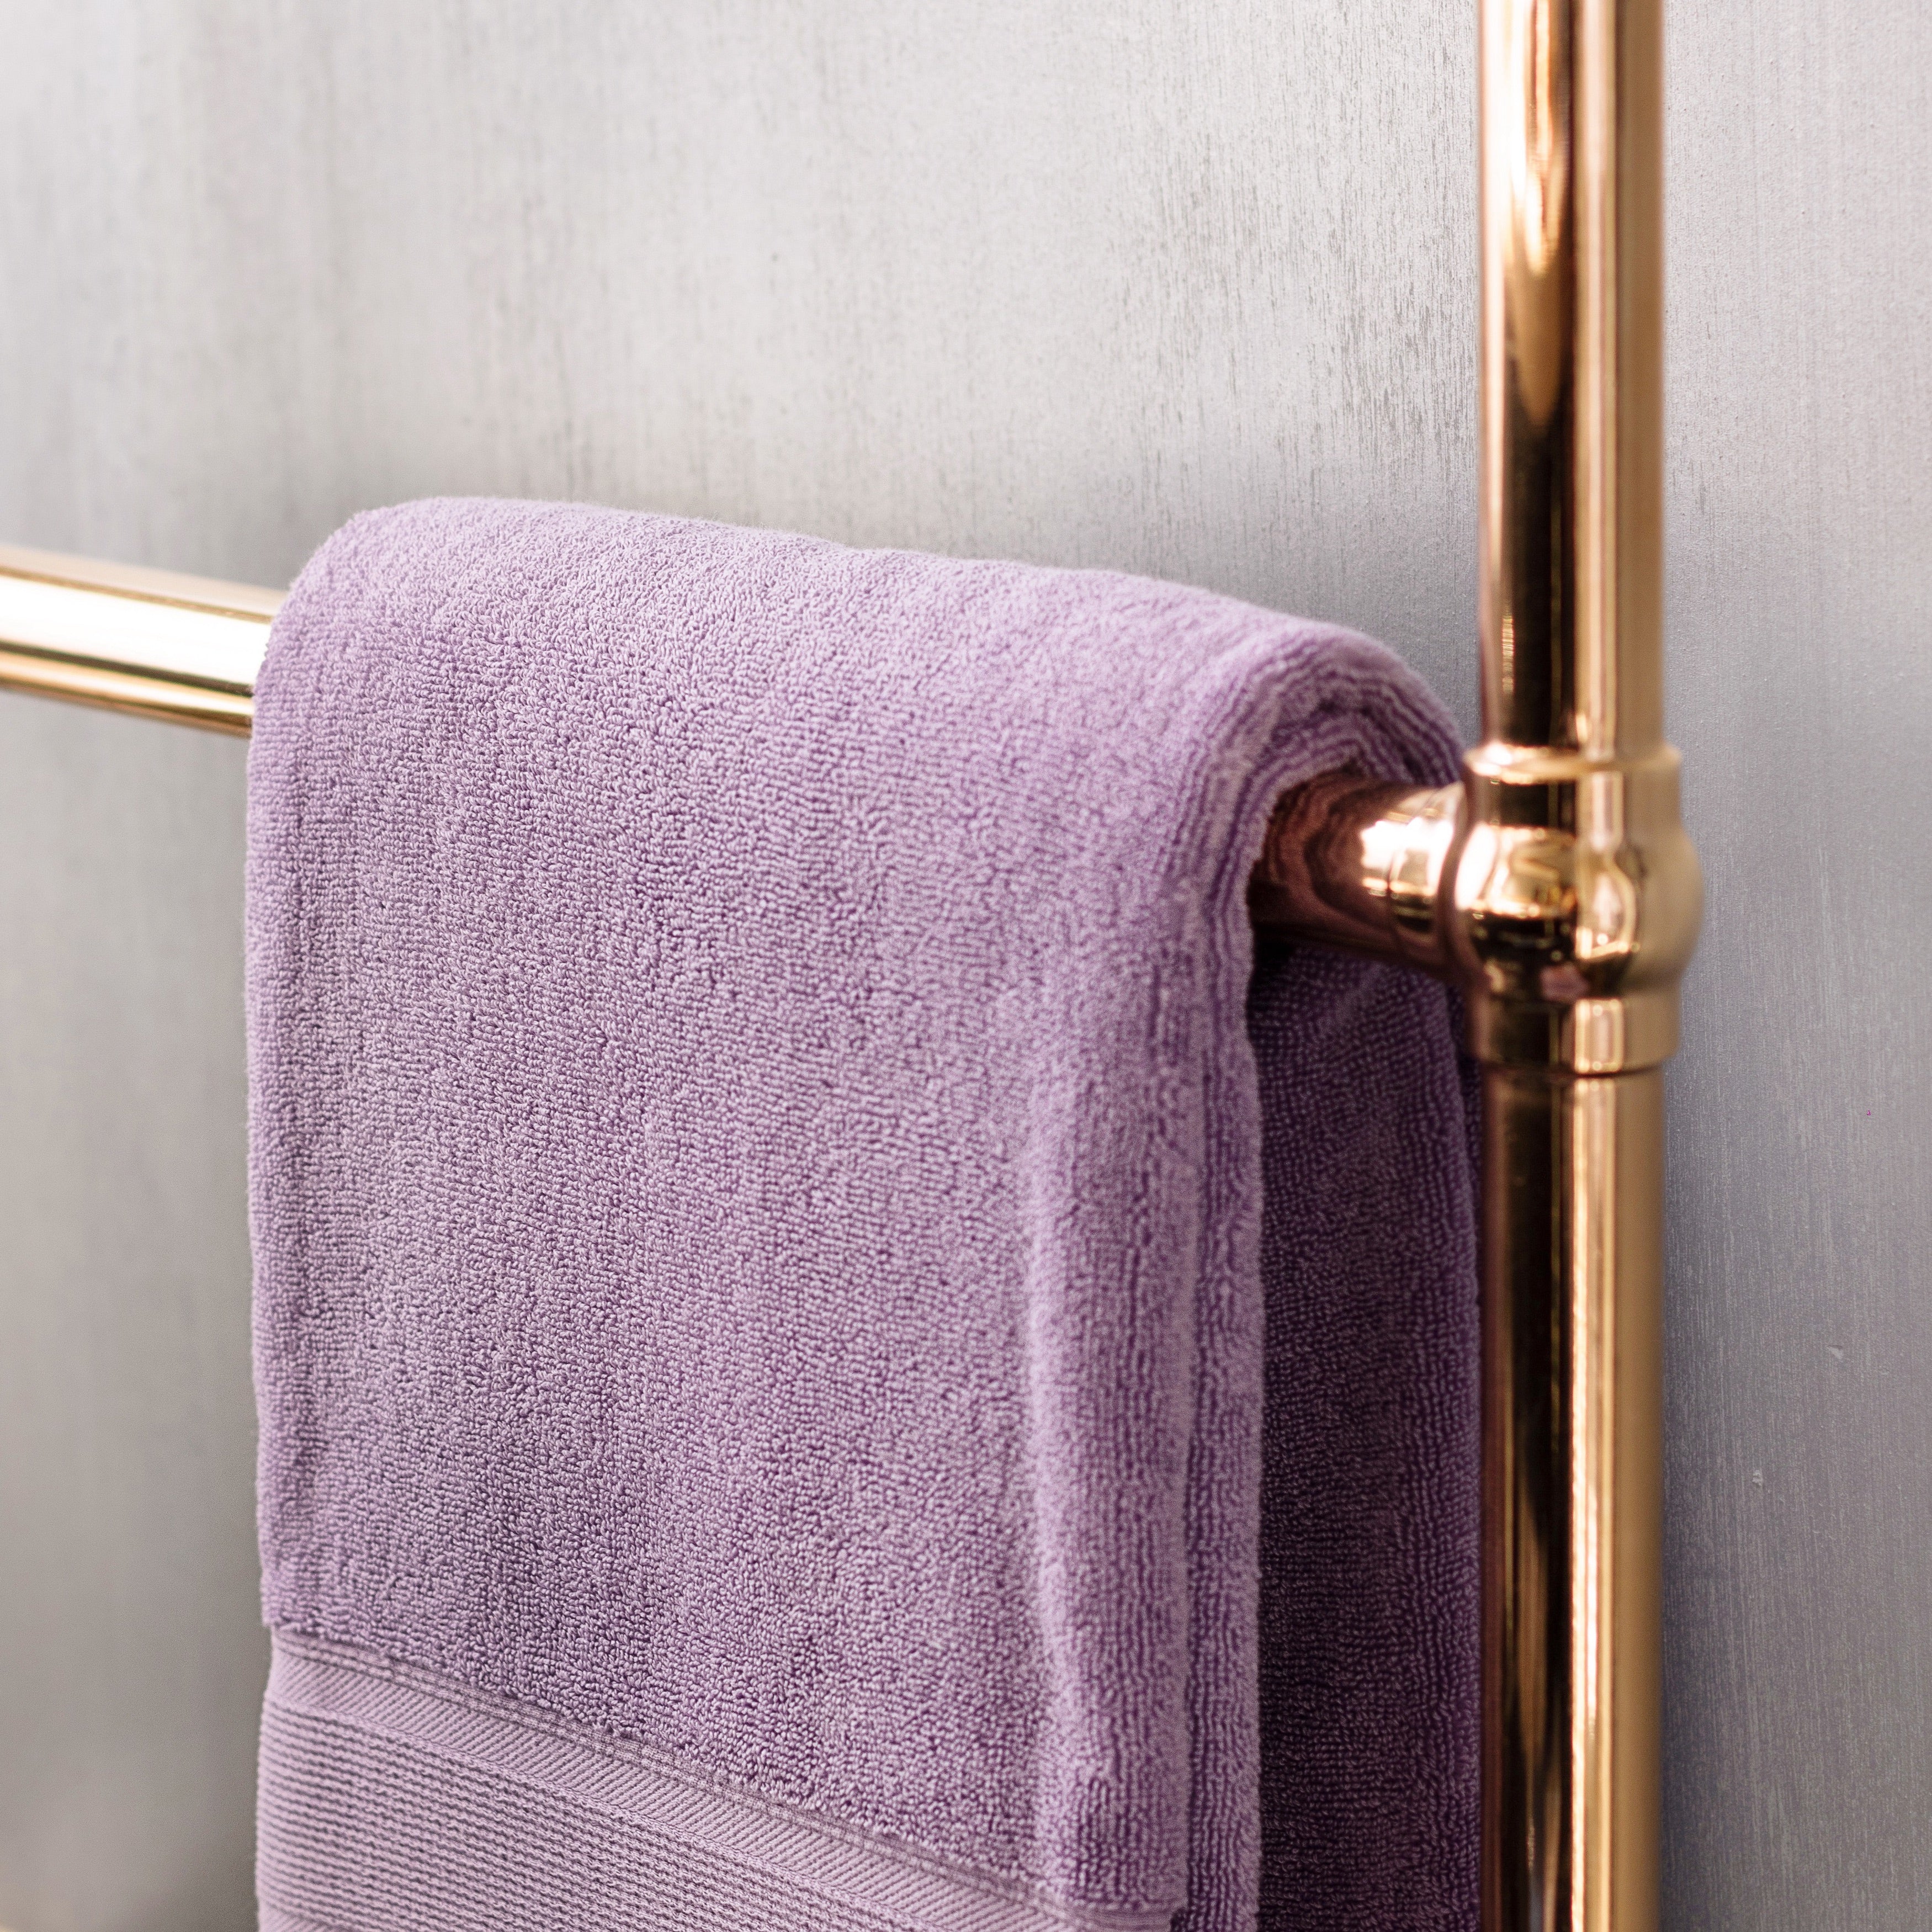 From Heated Towel Racks to Lighting Plan, Five Airbnb Decoration Hacks You Need to Know About